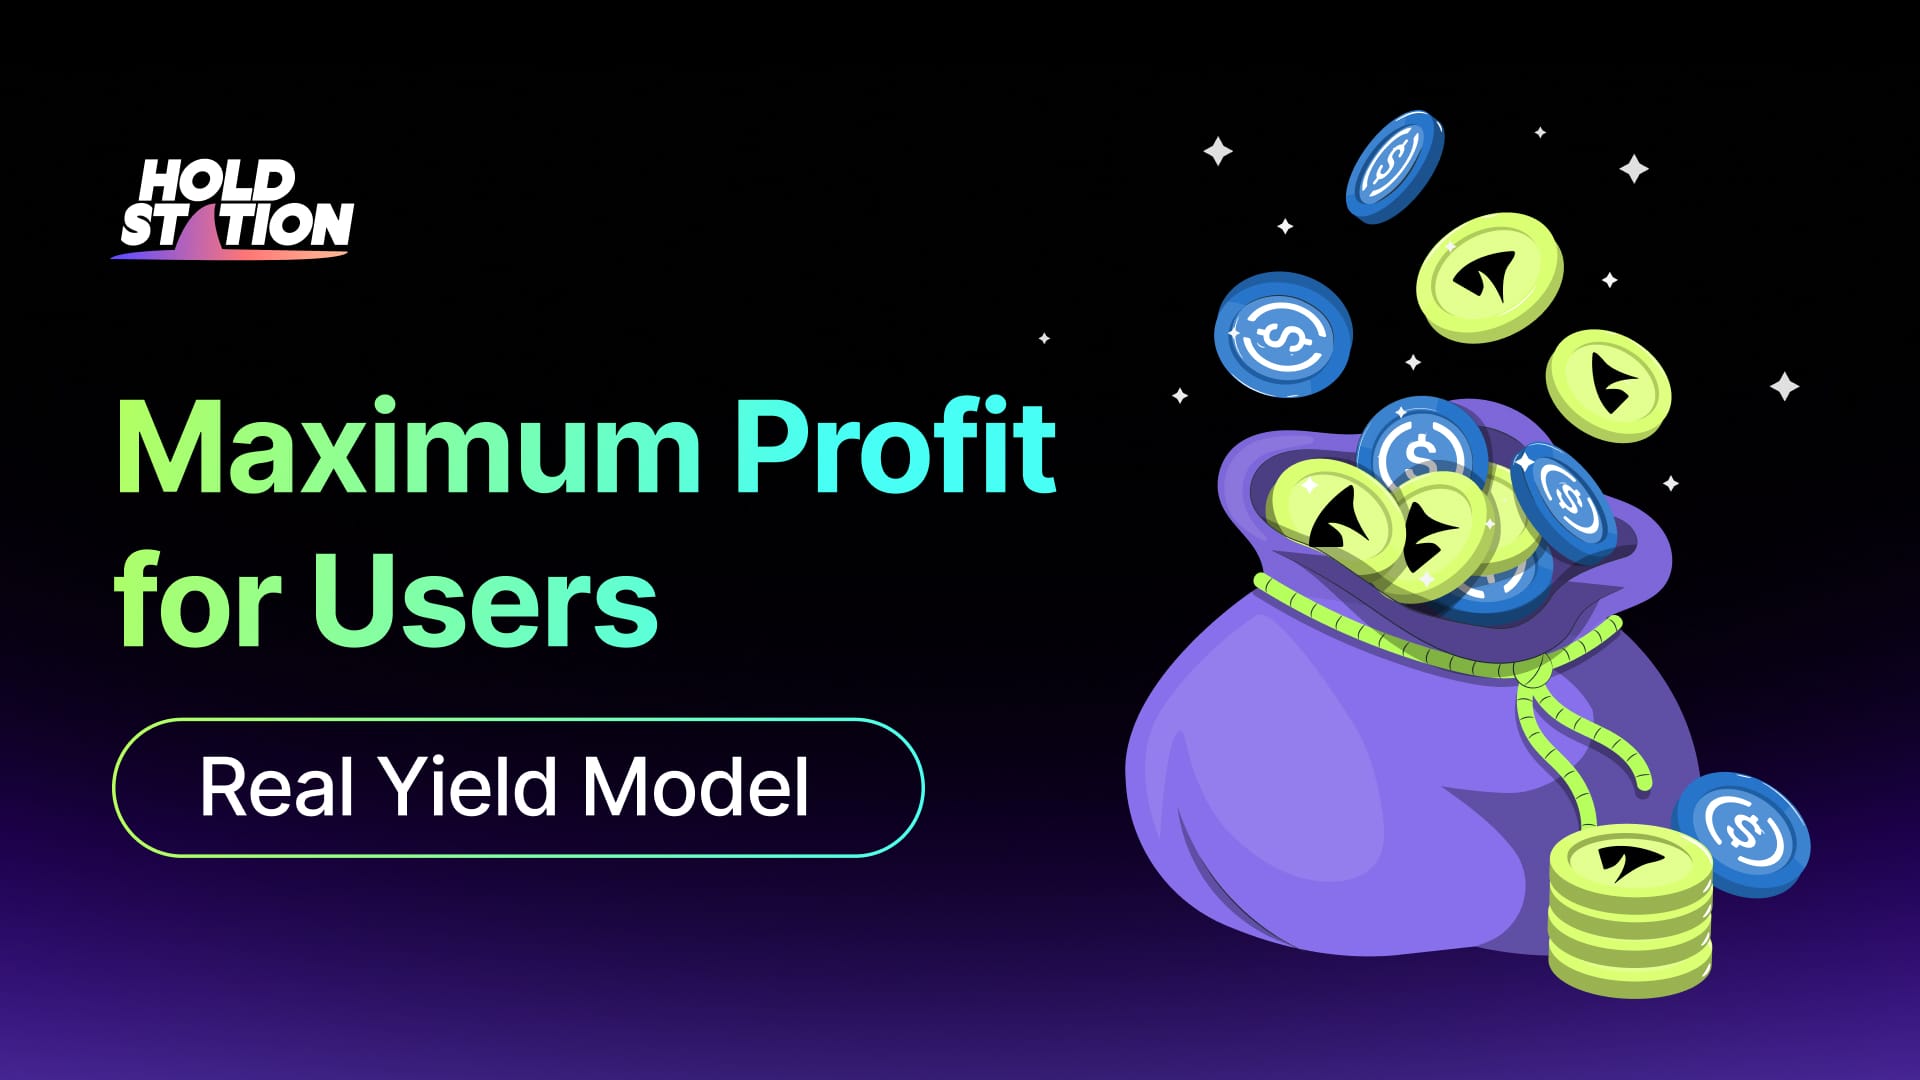 Holdstation: Maximum Profit for Users with Real Yield Model